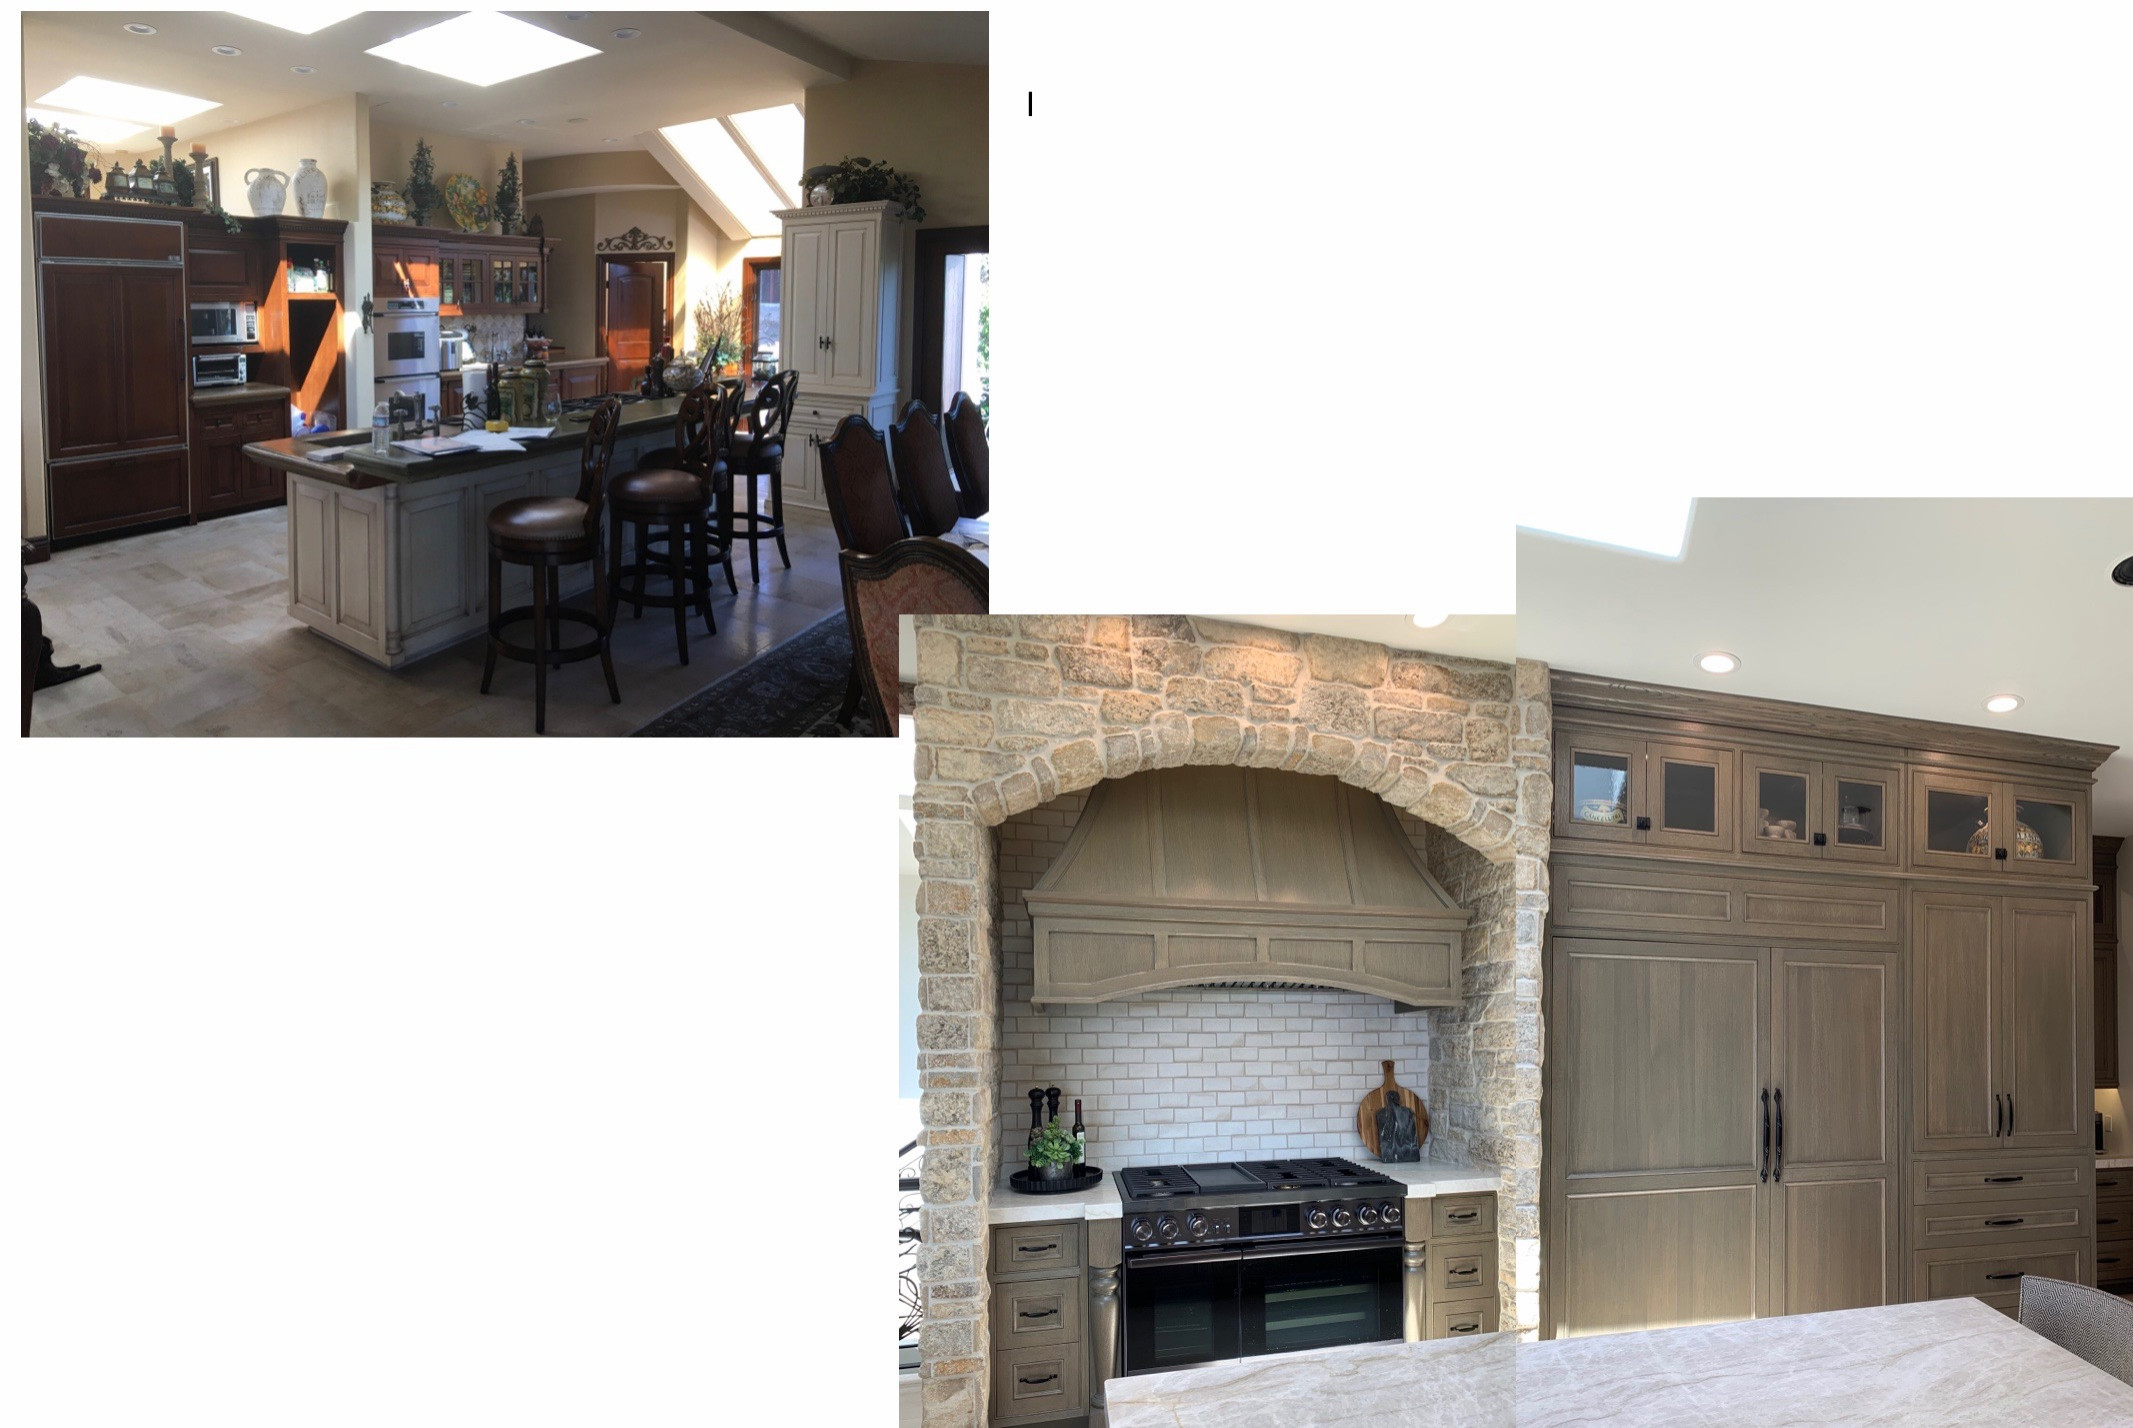 BEFORE & AFTER KITCHEN